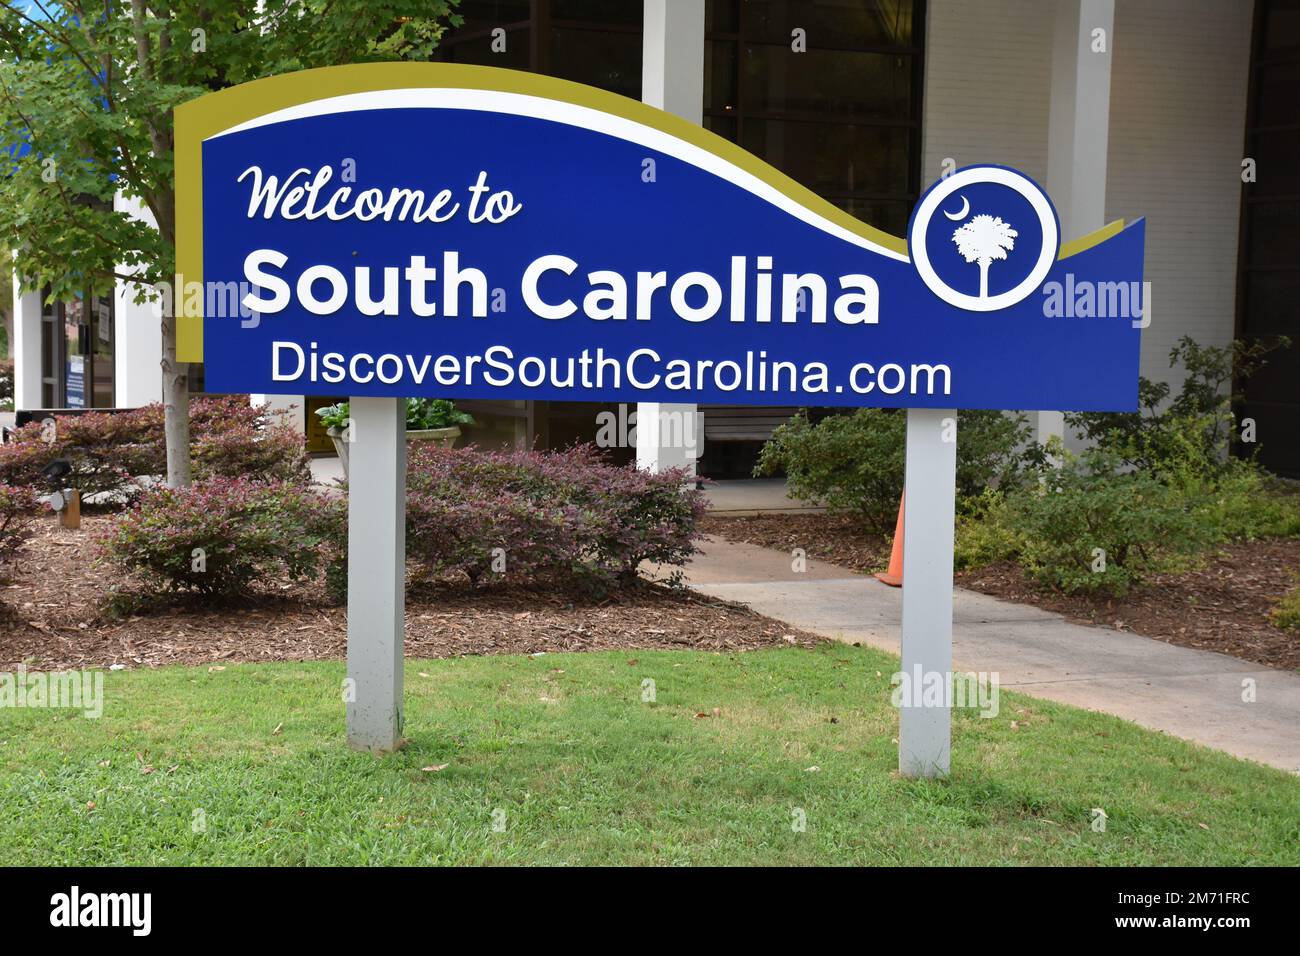 A Sign at the South Carolina Welcome Center welcoming visitors. Stock Photo